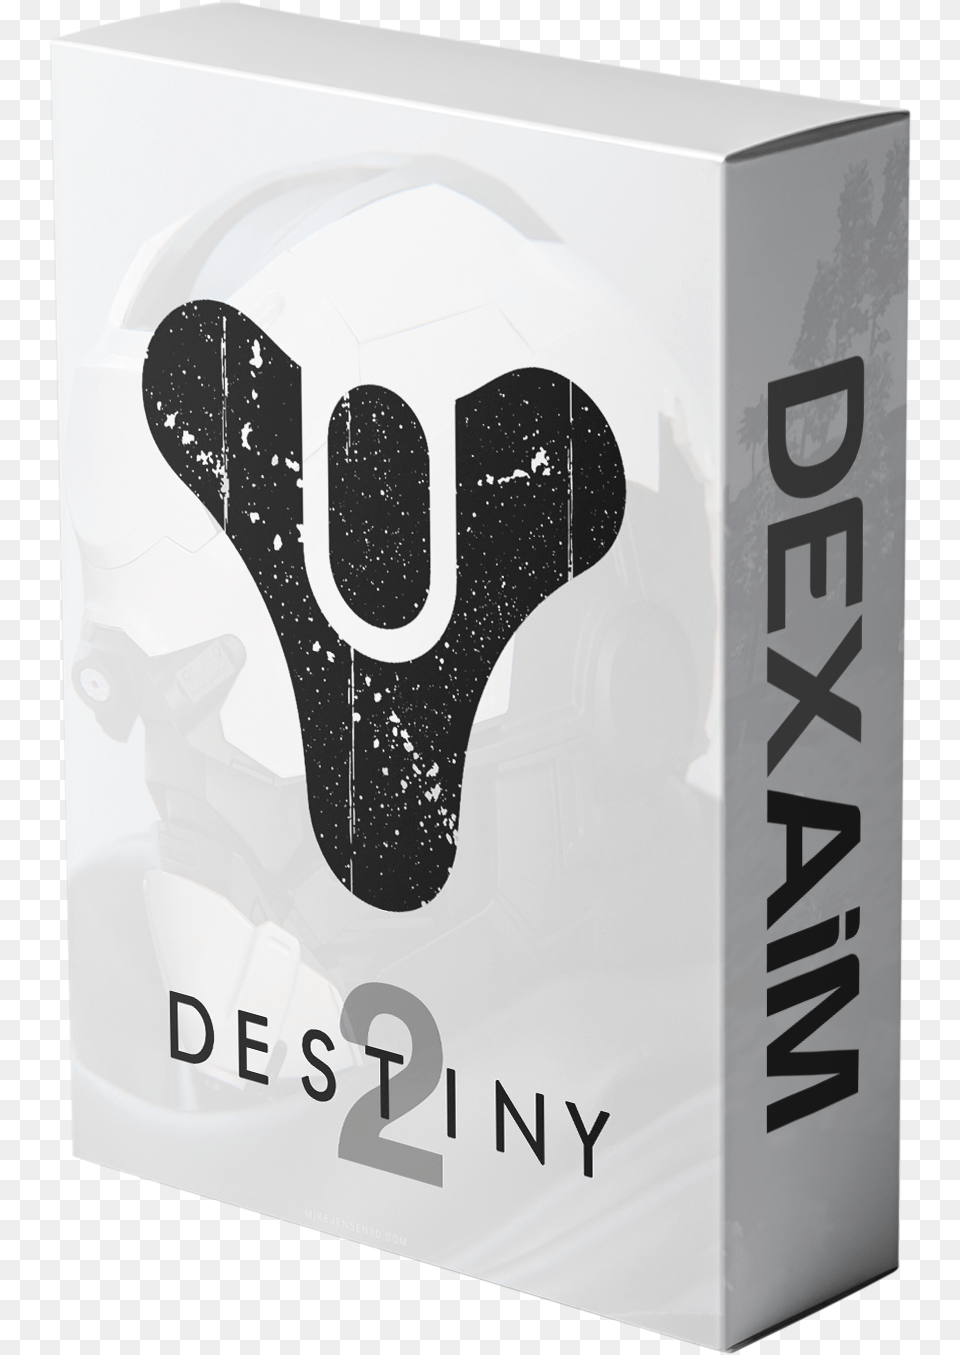 Selling Destiny, Box Free Png Download